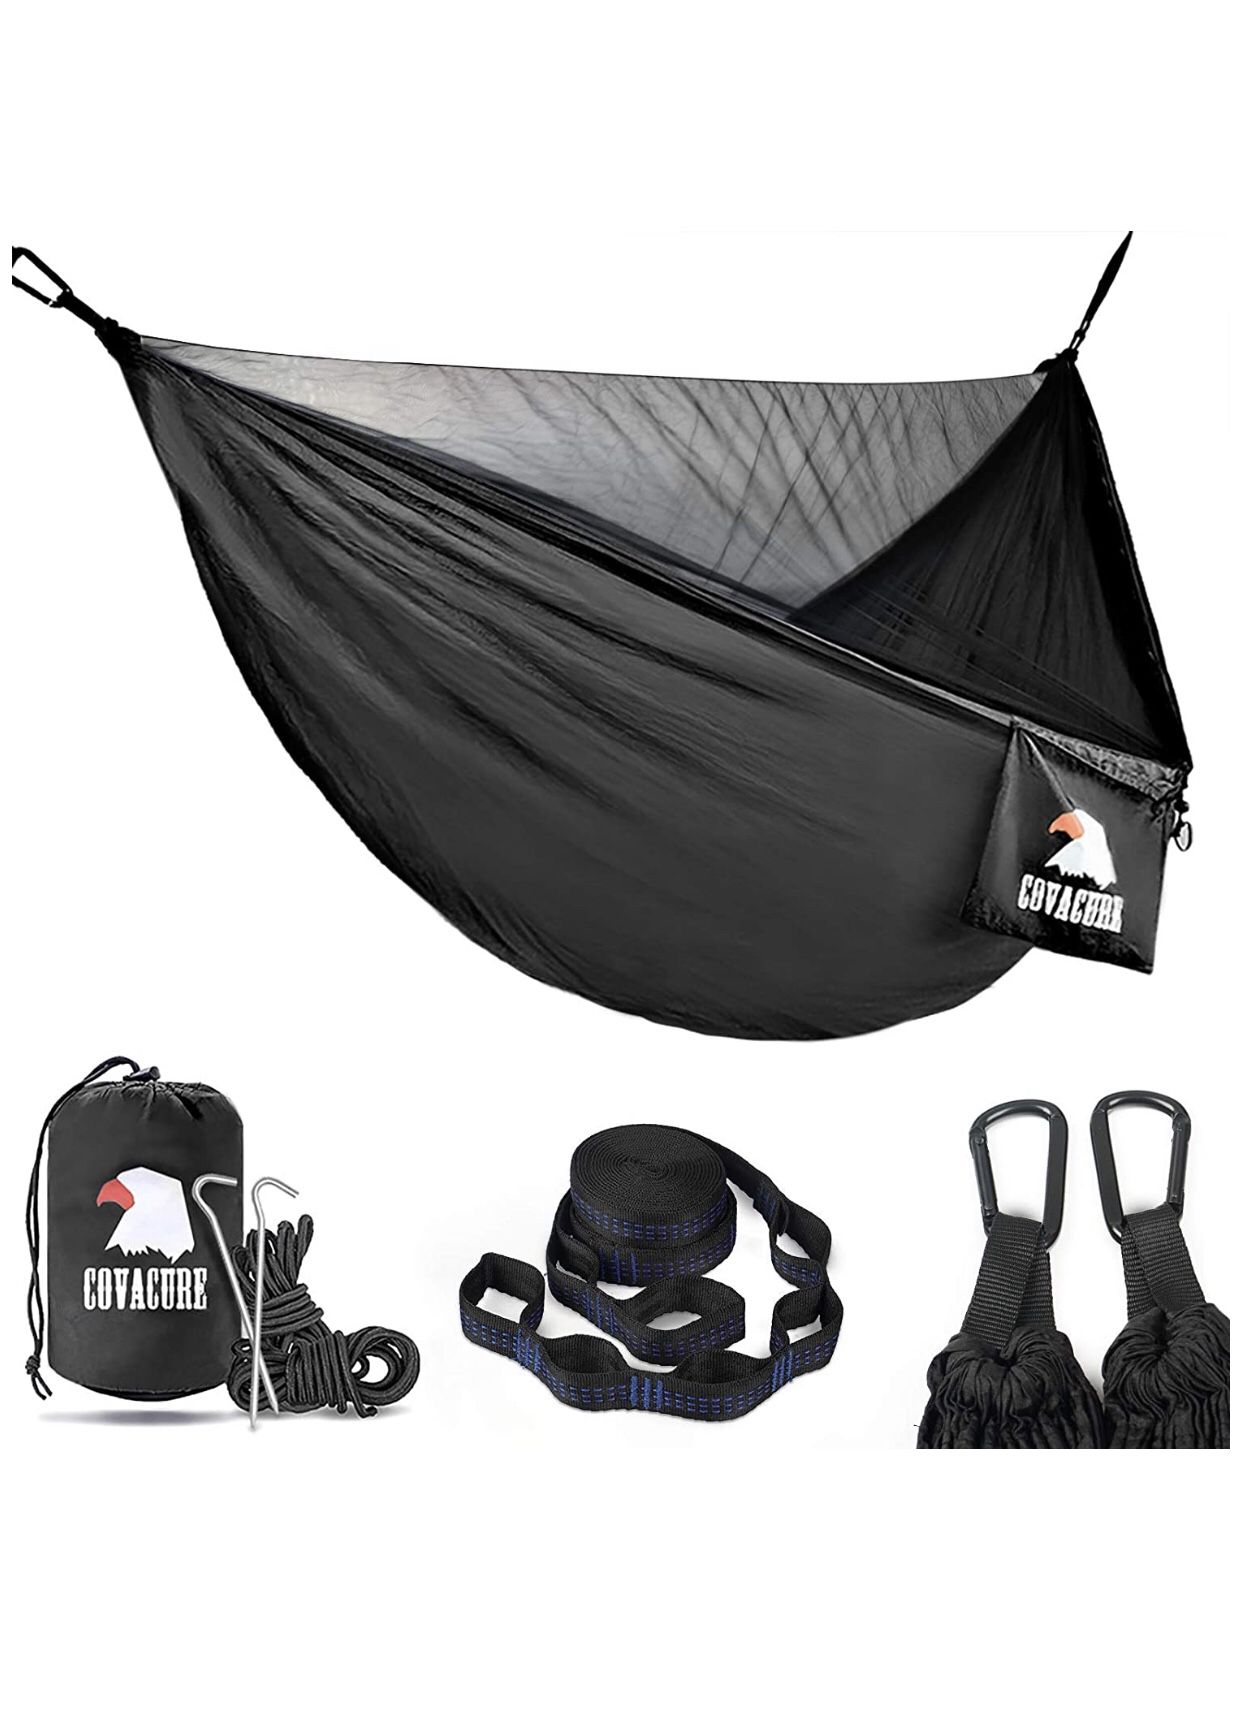 Covacure Camping Hammock with Net - Lightweight Double Hammock